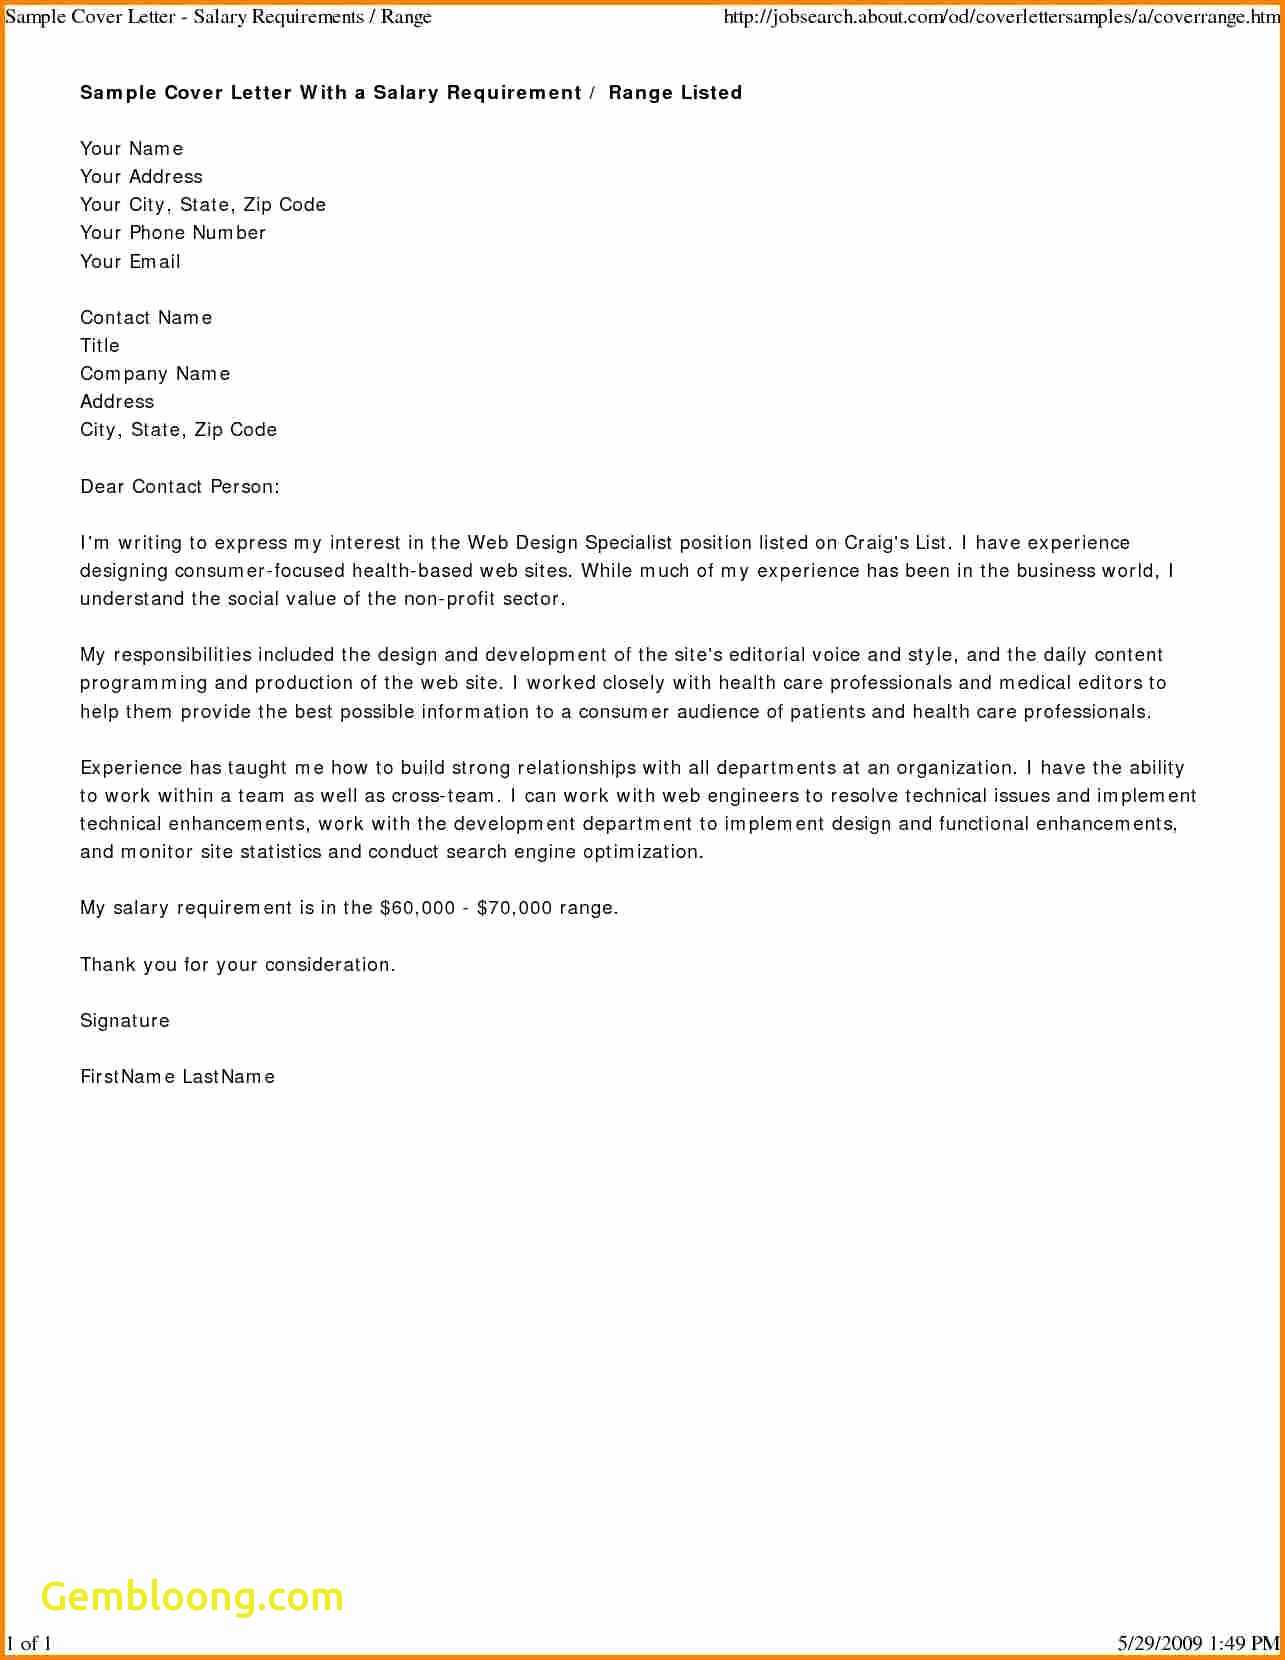 Repayment Agreement Letter Template - Installment Payment Agreement Template Beautiful Inspirational